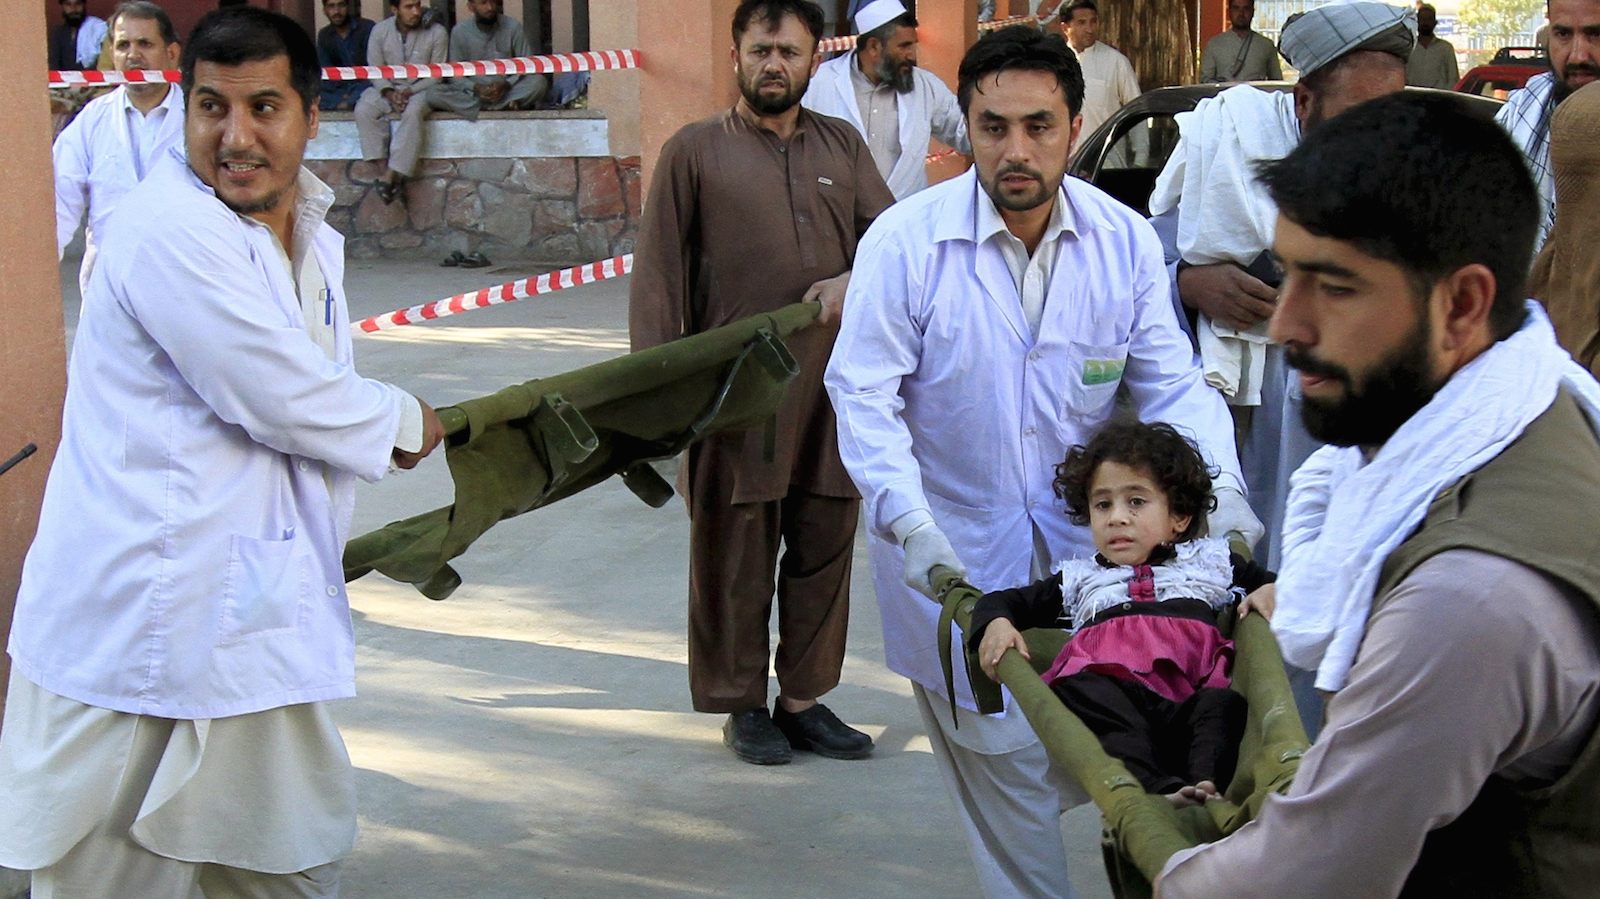 Rescue workers carry a girl who was injured after an earthquake, at a hospital in Jalalabad, Afghanistan, October 26, 2015. A powerful earthquake struck a remote area of northeastern Afghanistan on Monday.